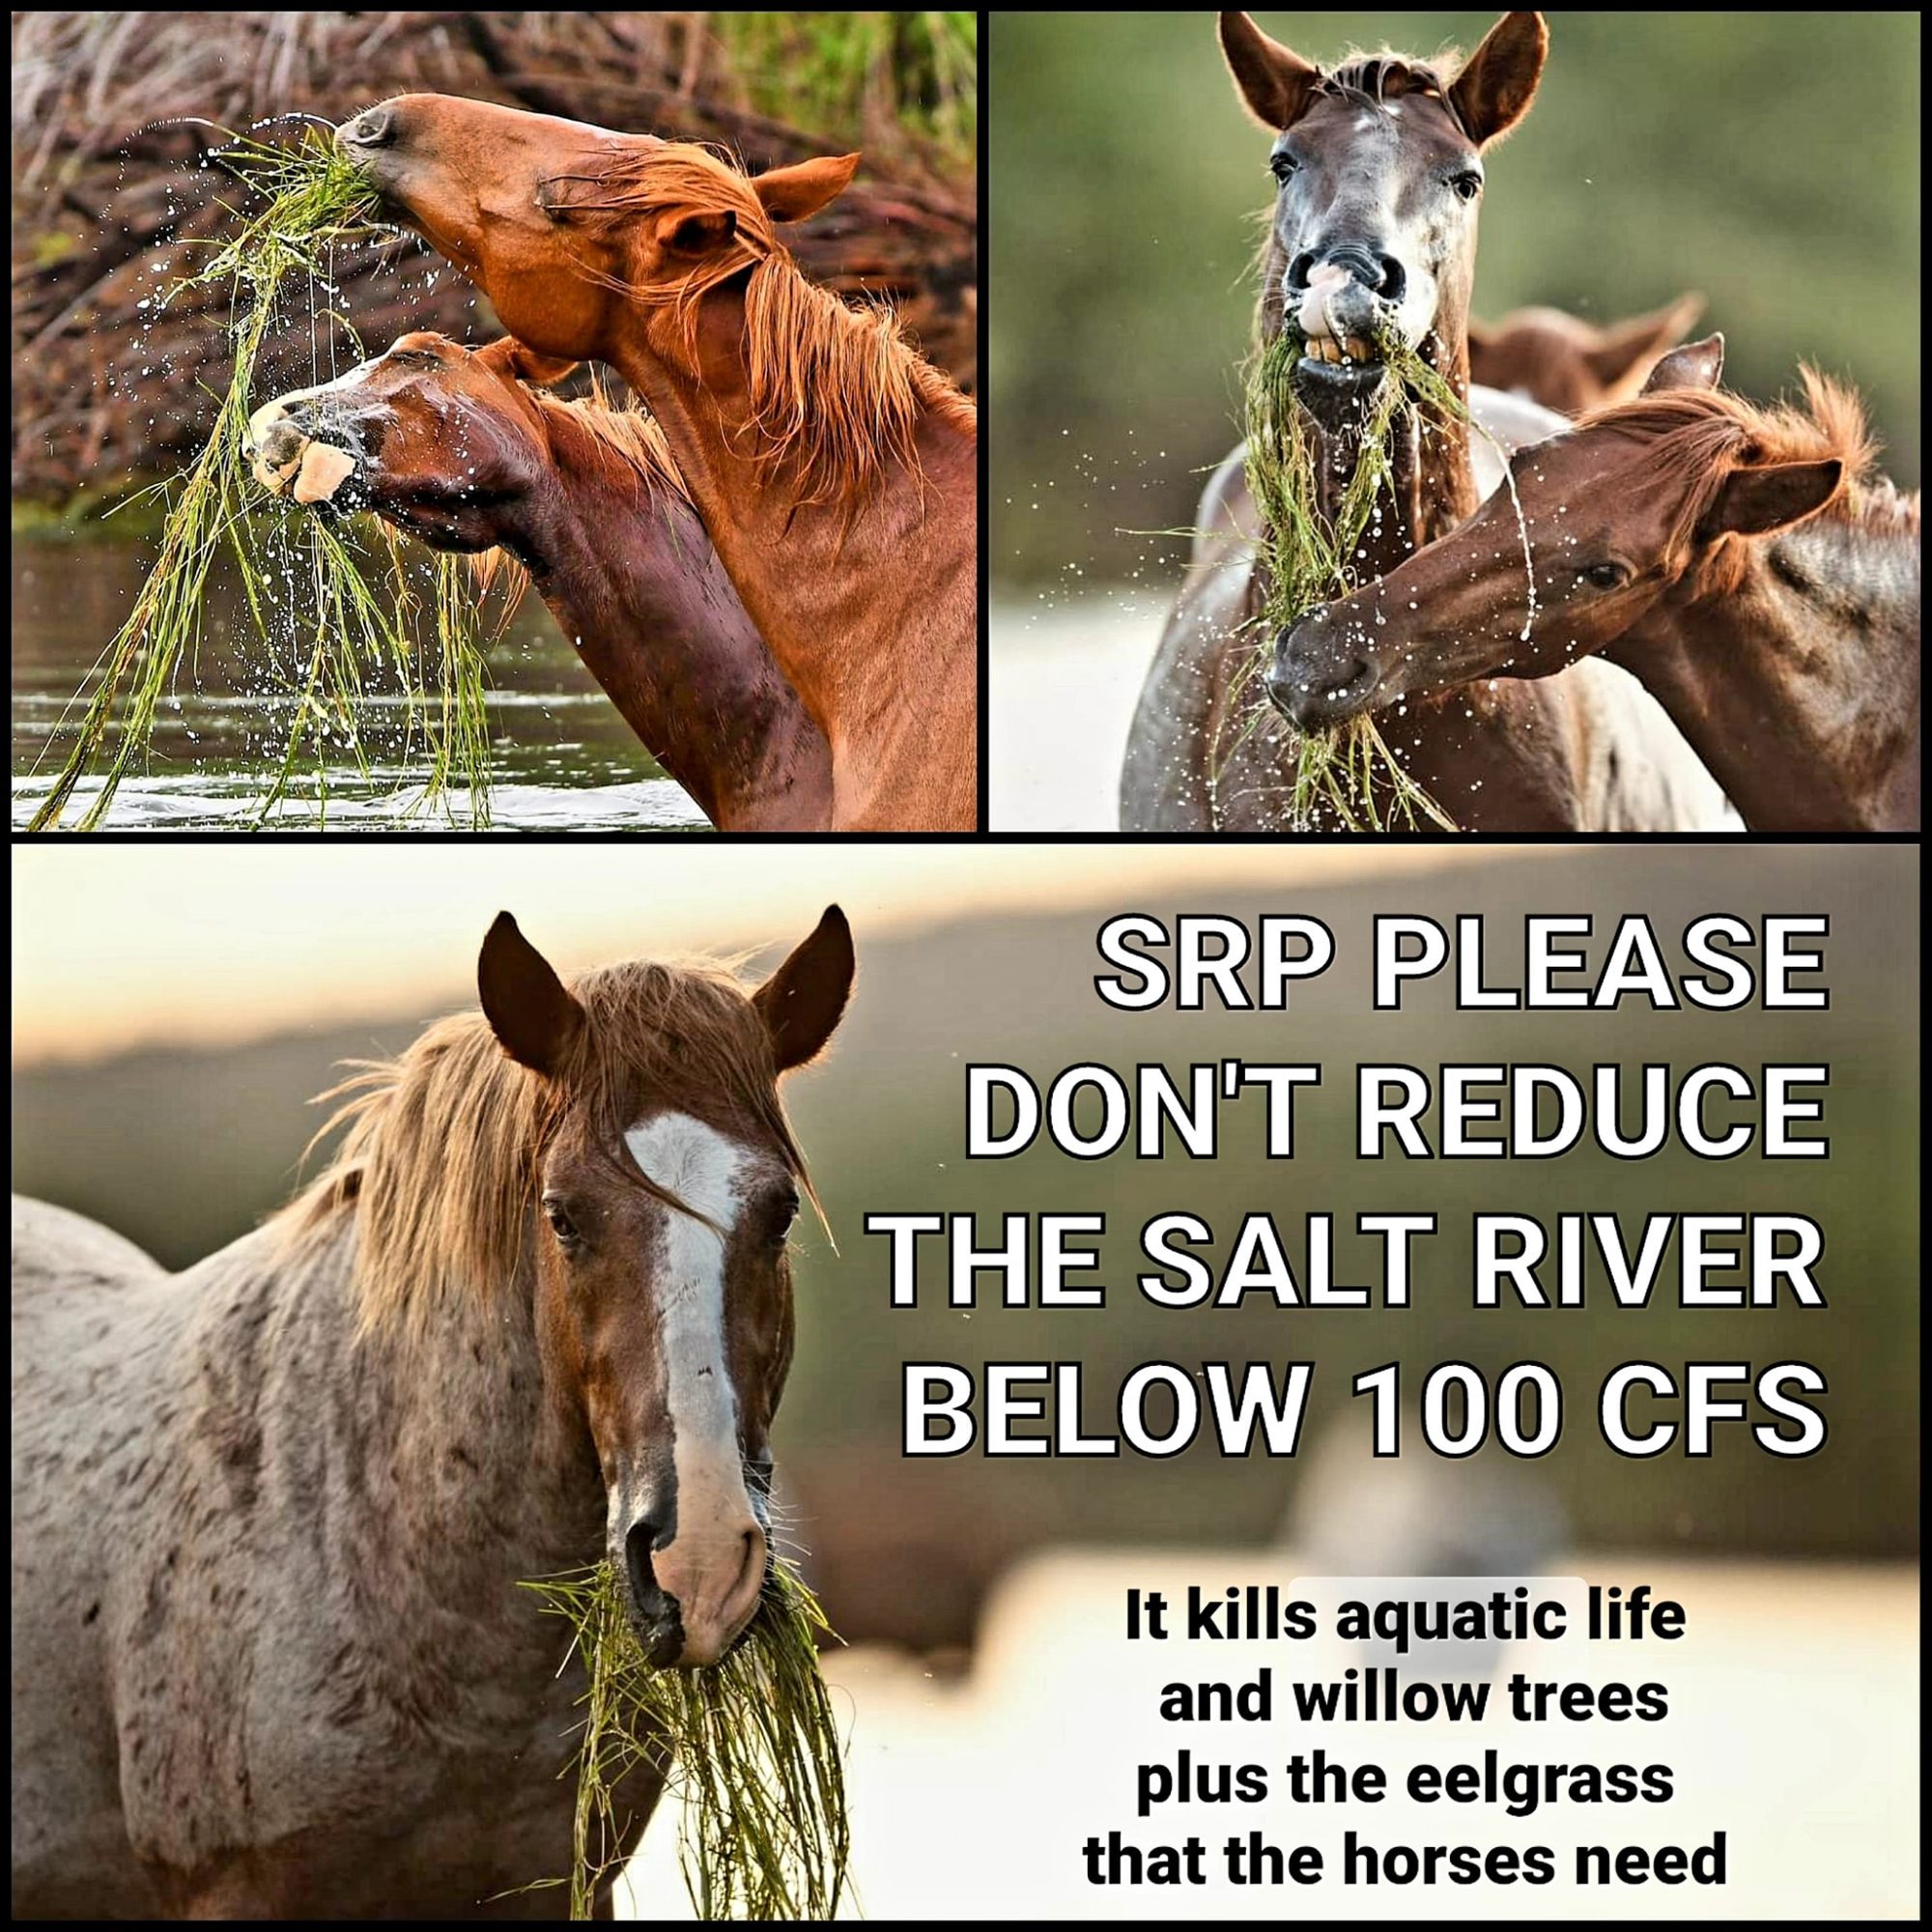 Another Challenge for the Salt River wild horses, but YOU can help!